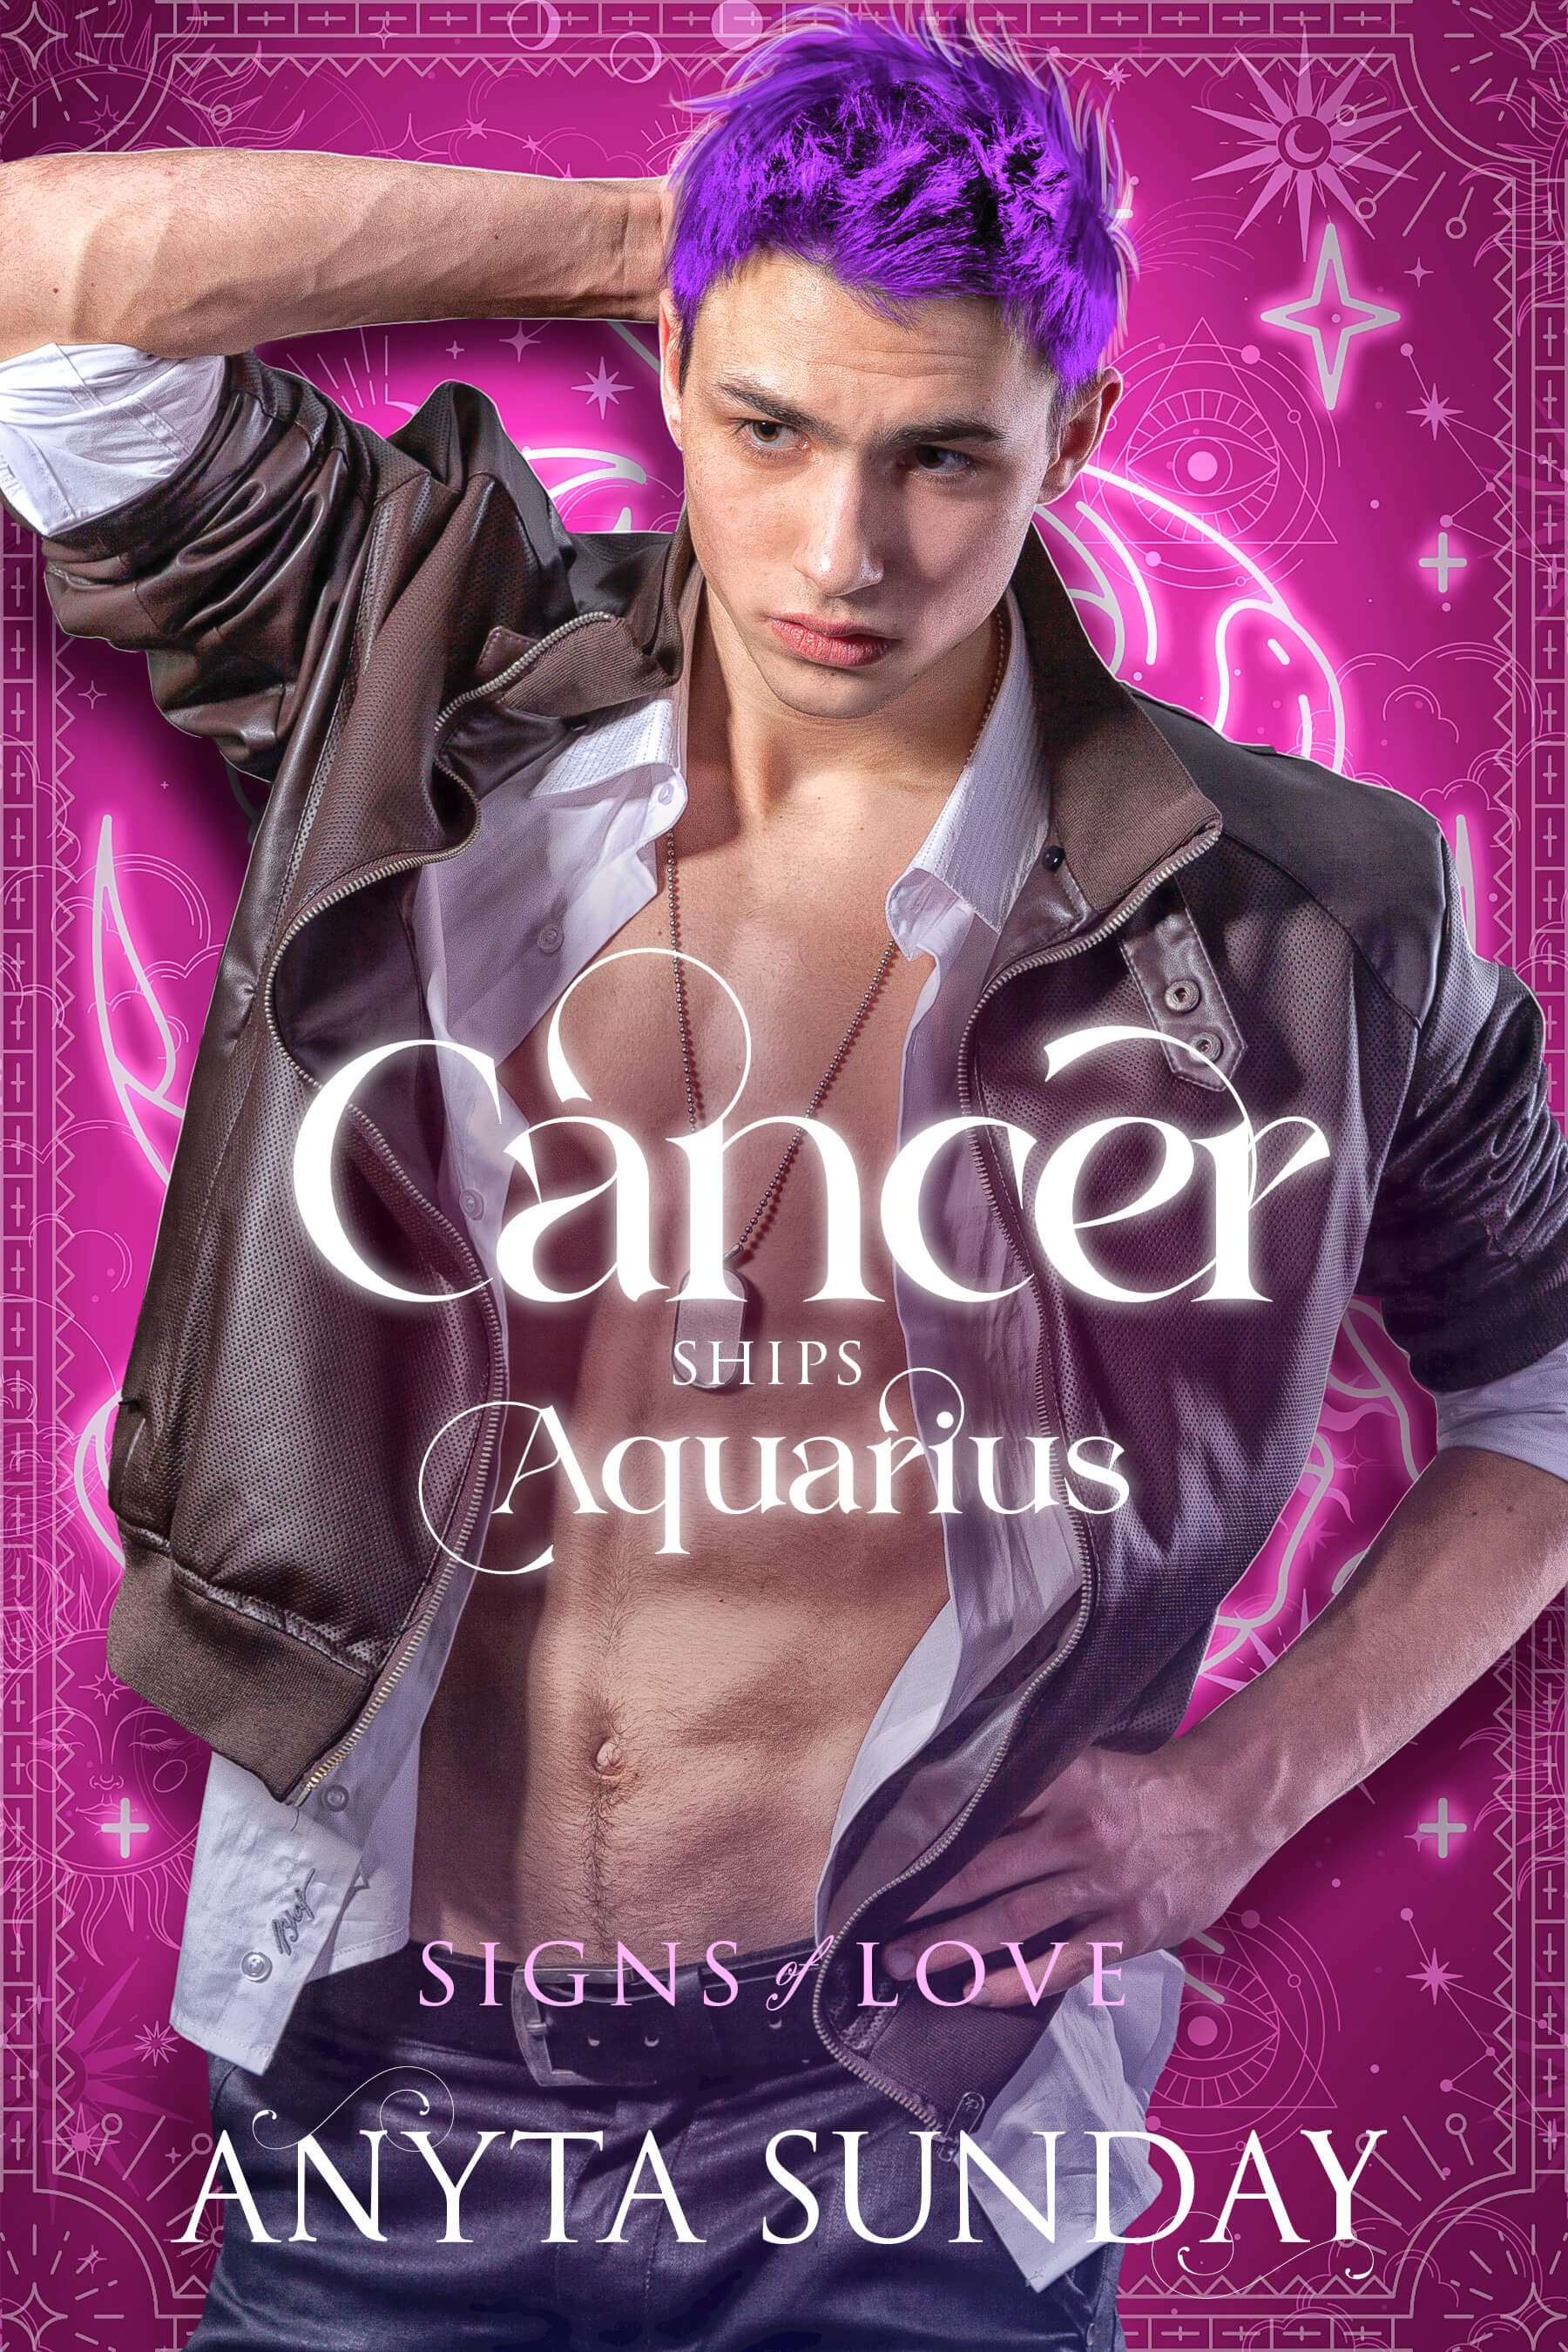 Cancer Ships Aquarius Cover Image - Gay Romance by Anyta Sunday